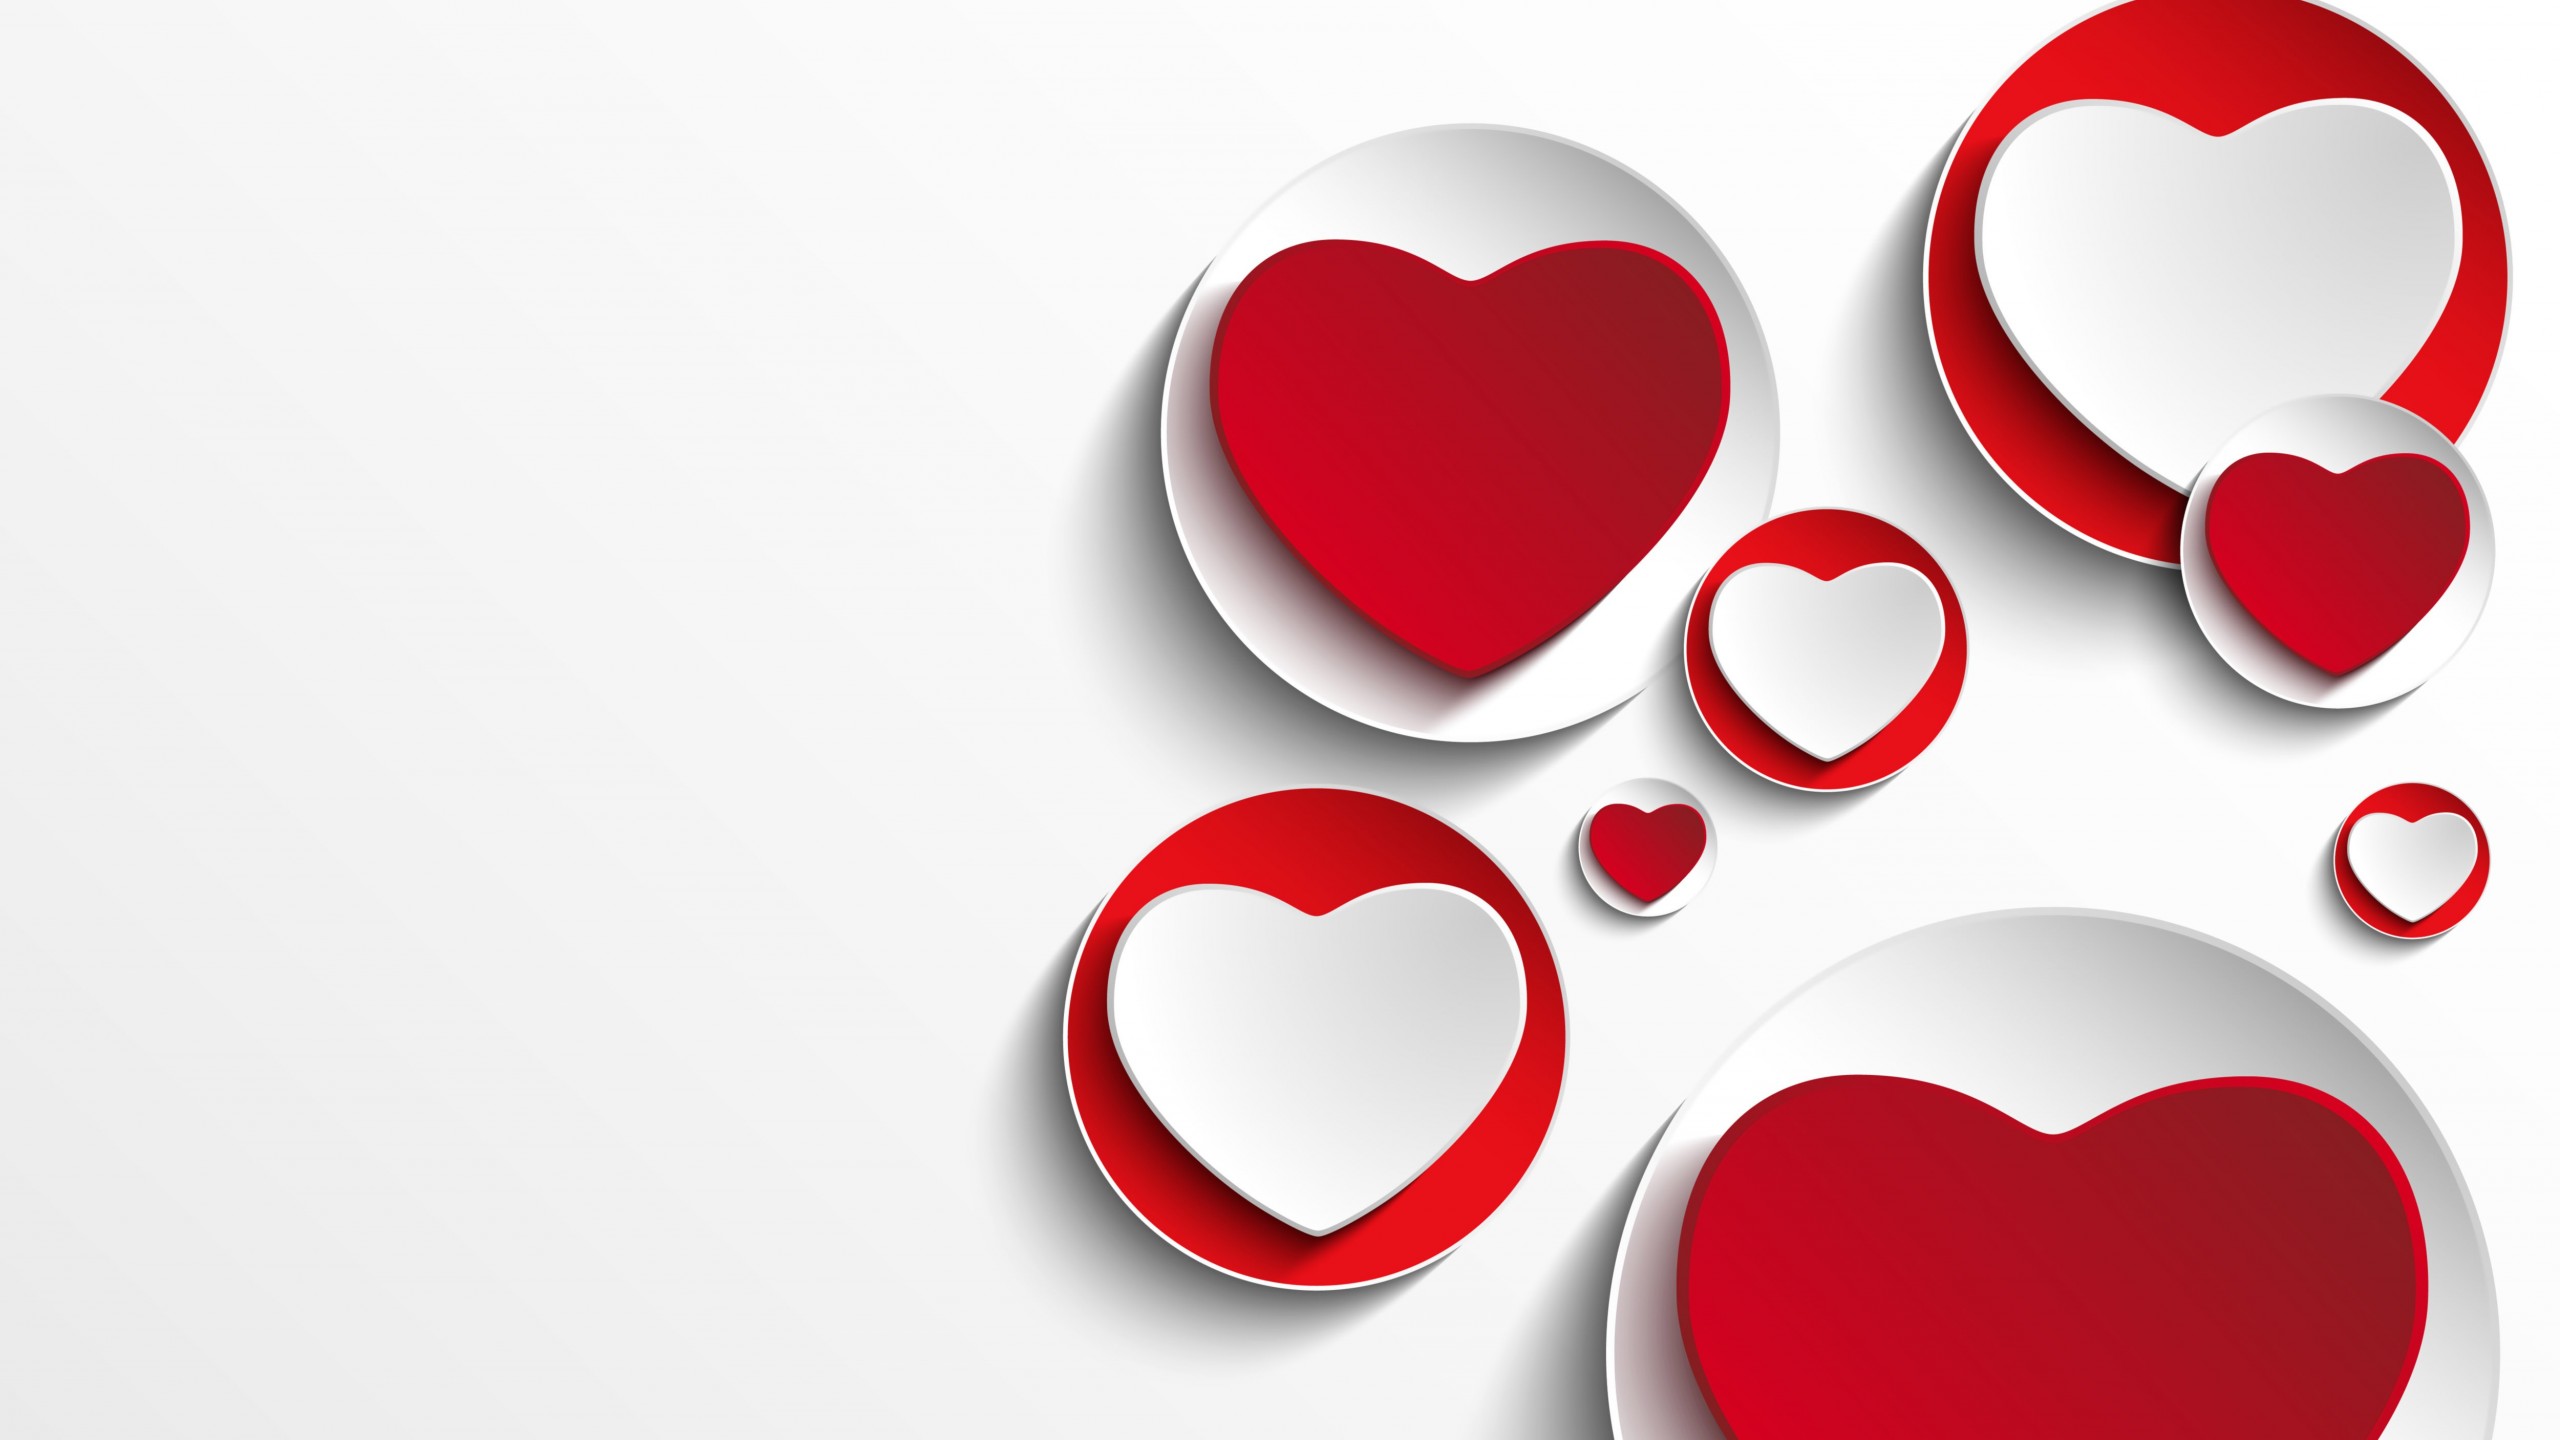 Minimalistic Hearts Shapes Wallpaper for Social Media YouTube Channel Art